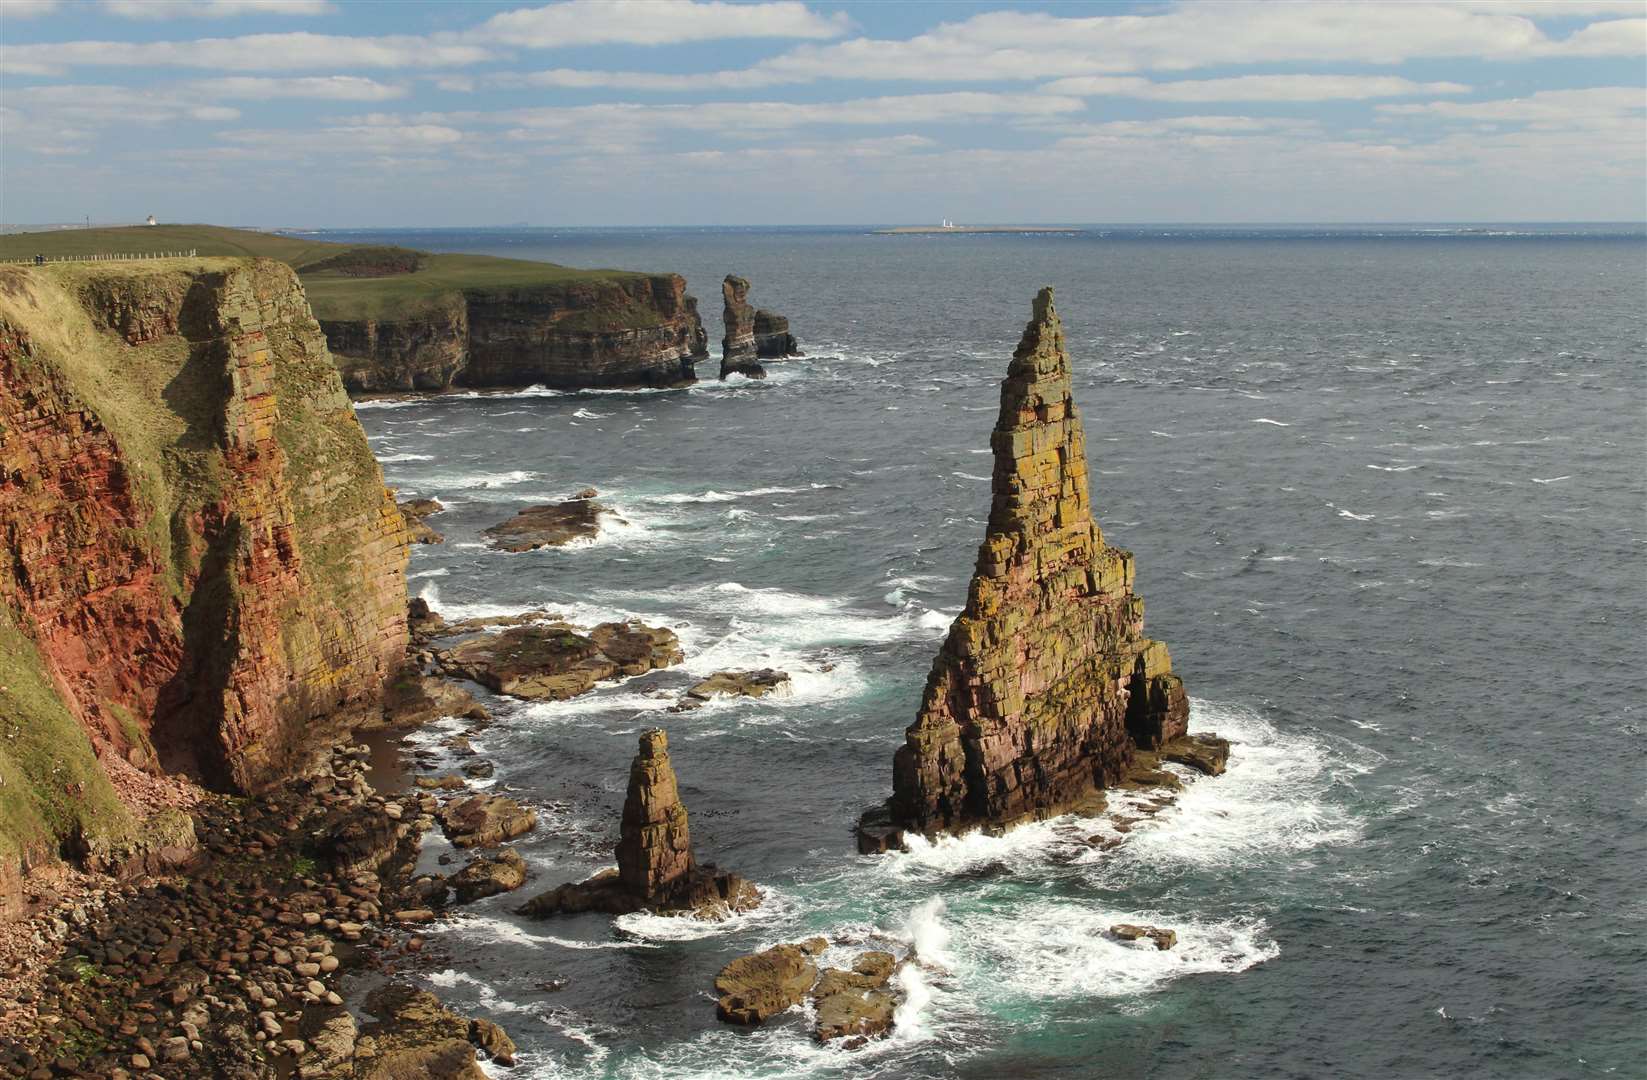 The proposed pods would be sited near the famous Stacks of Duncansby. Picture: Alan Hendry